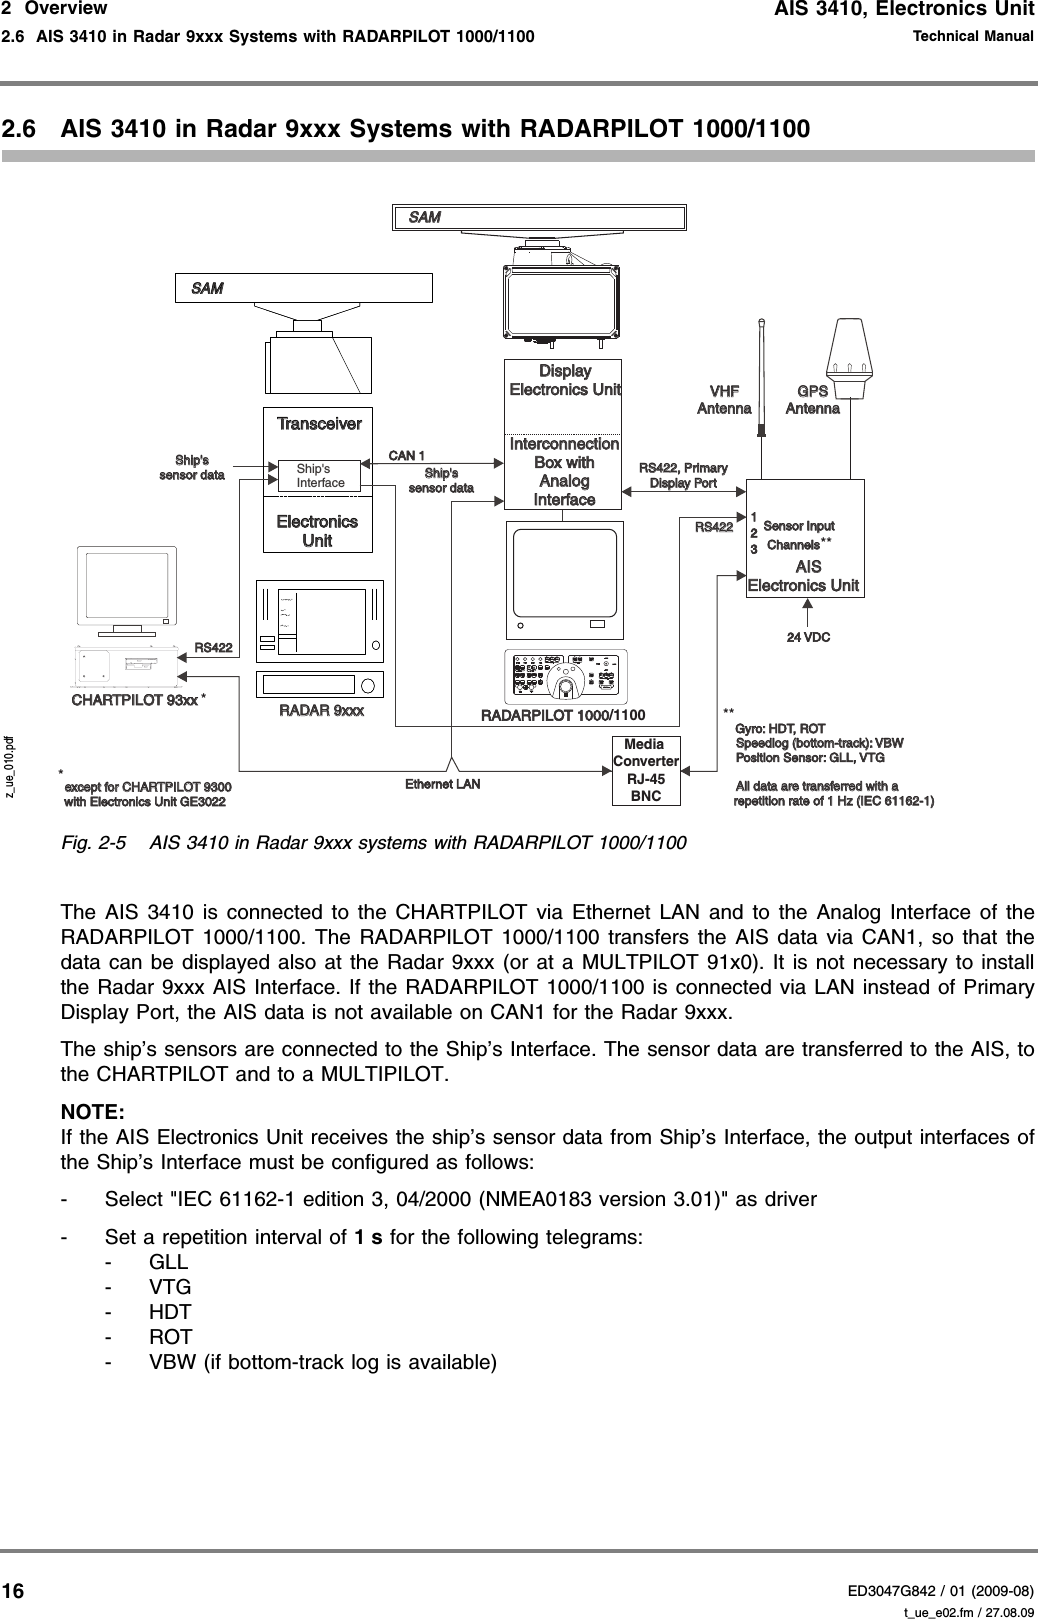 AIS 3410, Electronics UnitED3047G842 / 01 (2009-08)Technical Manual2  Overview2.6  AIS 3410 in Radar 9xxx Systems with RADARPILOT 1000/1100 t_ue_e02.fm / 27.08.09162.6 AIS 3410 in Radar 9xxx Systems with RADARPILOT 1000/1100Fig. 2-5 AIS 3410 in Radar 9xxx systems with RADARPILOT 1000/1100The AIS 3410 is connected to the CHARTPILOT via Ethernet LAN and to the Analog Interface of the RADARPILOT 1000/1100. The RADARPILOT 1000/1100 transfers the AIS data via CAN1, so that the data can be displayed also at the Radar 9xxx (or at a MULTPILOT 91x0). It is not necessary to install the Radar 9xxx AIS Interface. If the RADARPILOT 1000/1100 is connected via LAN instead of Primary Display Port, the AIS data is not available on CAN1 for the Radar 9xxx.The ship’s sensors are connected to the Ship’s Interface. The sensor data are transferred to the AIS, to the CHARTPILOT and to a MULTIPILOT.NOTE:If the AIS Electronics Unit receives the ship’s sensor data from Ship’s Interface, the output interfaces of the Ship’s Interface must be configured as follows:- Select &quot;IEC 61162-1 edition 3, 04/2000 (NMEA0183 version 3.01)&quot; as driver- Set a repetition interval of 1 s for the following telegrams: -GLL -VTG - HDT -ROT - VBW (if bottom-track log is available)z_ue_010.pdfVHFAntennaVHFAntennaRADARPILOT 1000/1100RADAR 9xxxRADAR 9xxxAISElectronics UnitAISElectronics UnitGPSAntennaGPSAntennaSAMSAMShip&apos;ssensor dataShip&apos;ssensor dataShip&apos;ssensor dataShip&apos;ssensor dataCAN 1RS422, PrimaryRS422, PrimaryDisplay PortDisplay PortEthernet LANRS422RS422RS422RS422ElectronicsUnitElectronicsUnitTransceiverTransceiverShip&apos;sInterfaceInterconnectionBox withAnalogInterfaceInterconnectionBox withAnalogInterfaceDisplayElectronics UnitDisplayElectronics UnitSAMSAMSensor InputChannelsSensor InputChannels123Gyro: HDT, ROTSpeedlog (bottom-track): VBWPosition Sensor: GLL, VTGAll data are transferred with arepetition rate of 1 Hz (IEC 61162-1)Gyro: HDT, ROTSpeedlog (bottom-track): VBWPosition Sensor: GLL, VTGAll data are transferred with arepetition rate of 1 Hz (IEC 61162-1)CHARTPILOT 93xxCHARTPILOT 93xxexcept for CHARTPILOT 9300with Electronics Unit GE3022except for CHARTPILOT 9300with Electronics Unit GE302224 VDCMedia ConverterRJ-45BNC******